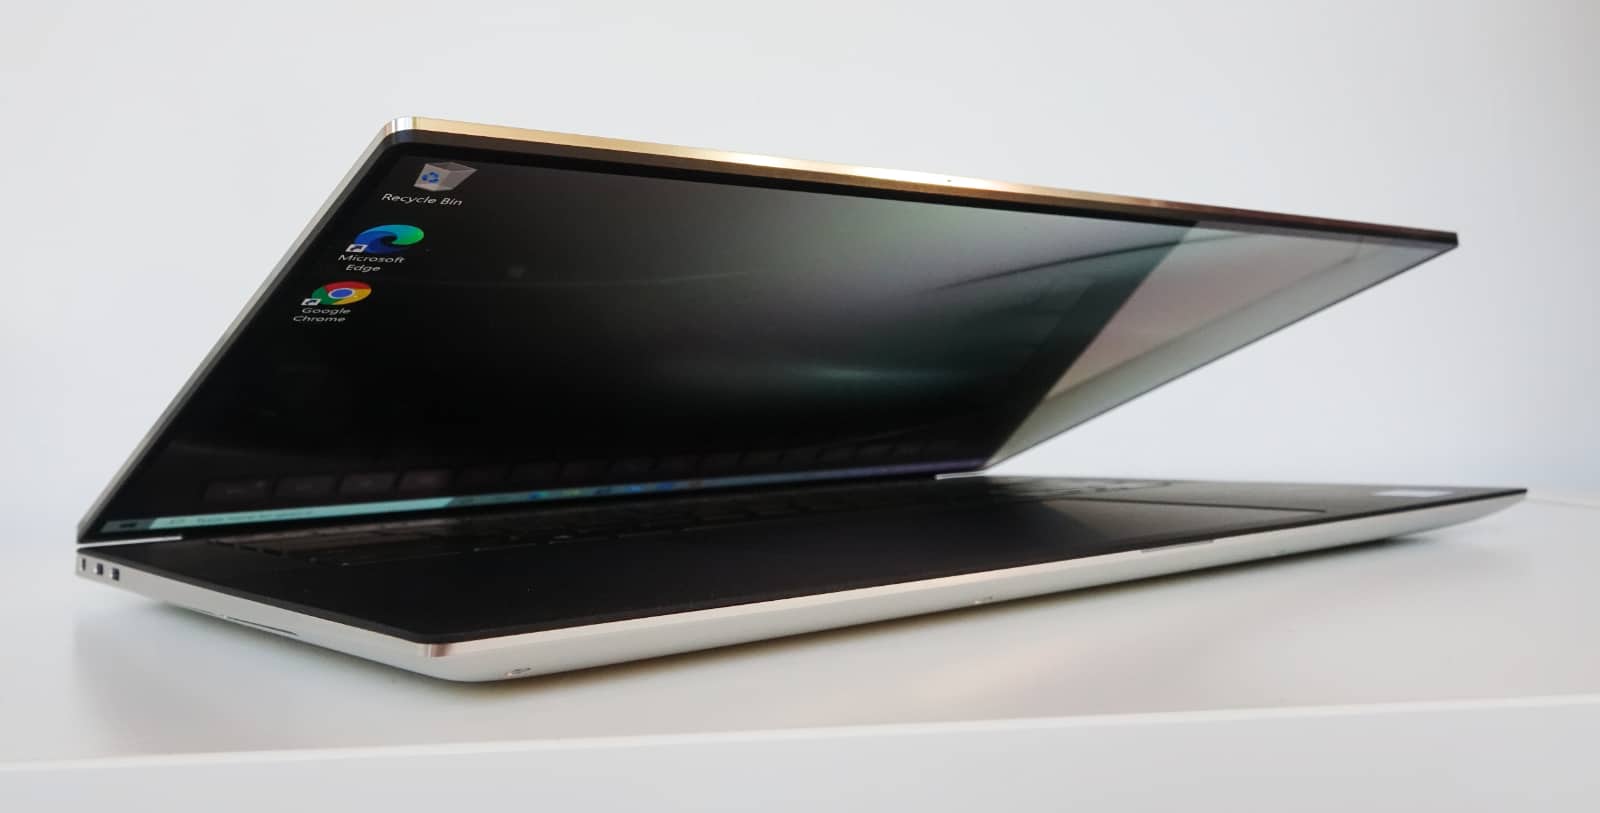 Dell XPS 15 (9550) review: InfinityEdge and all the power